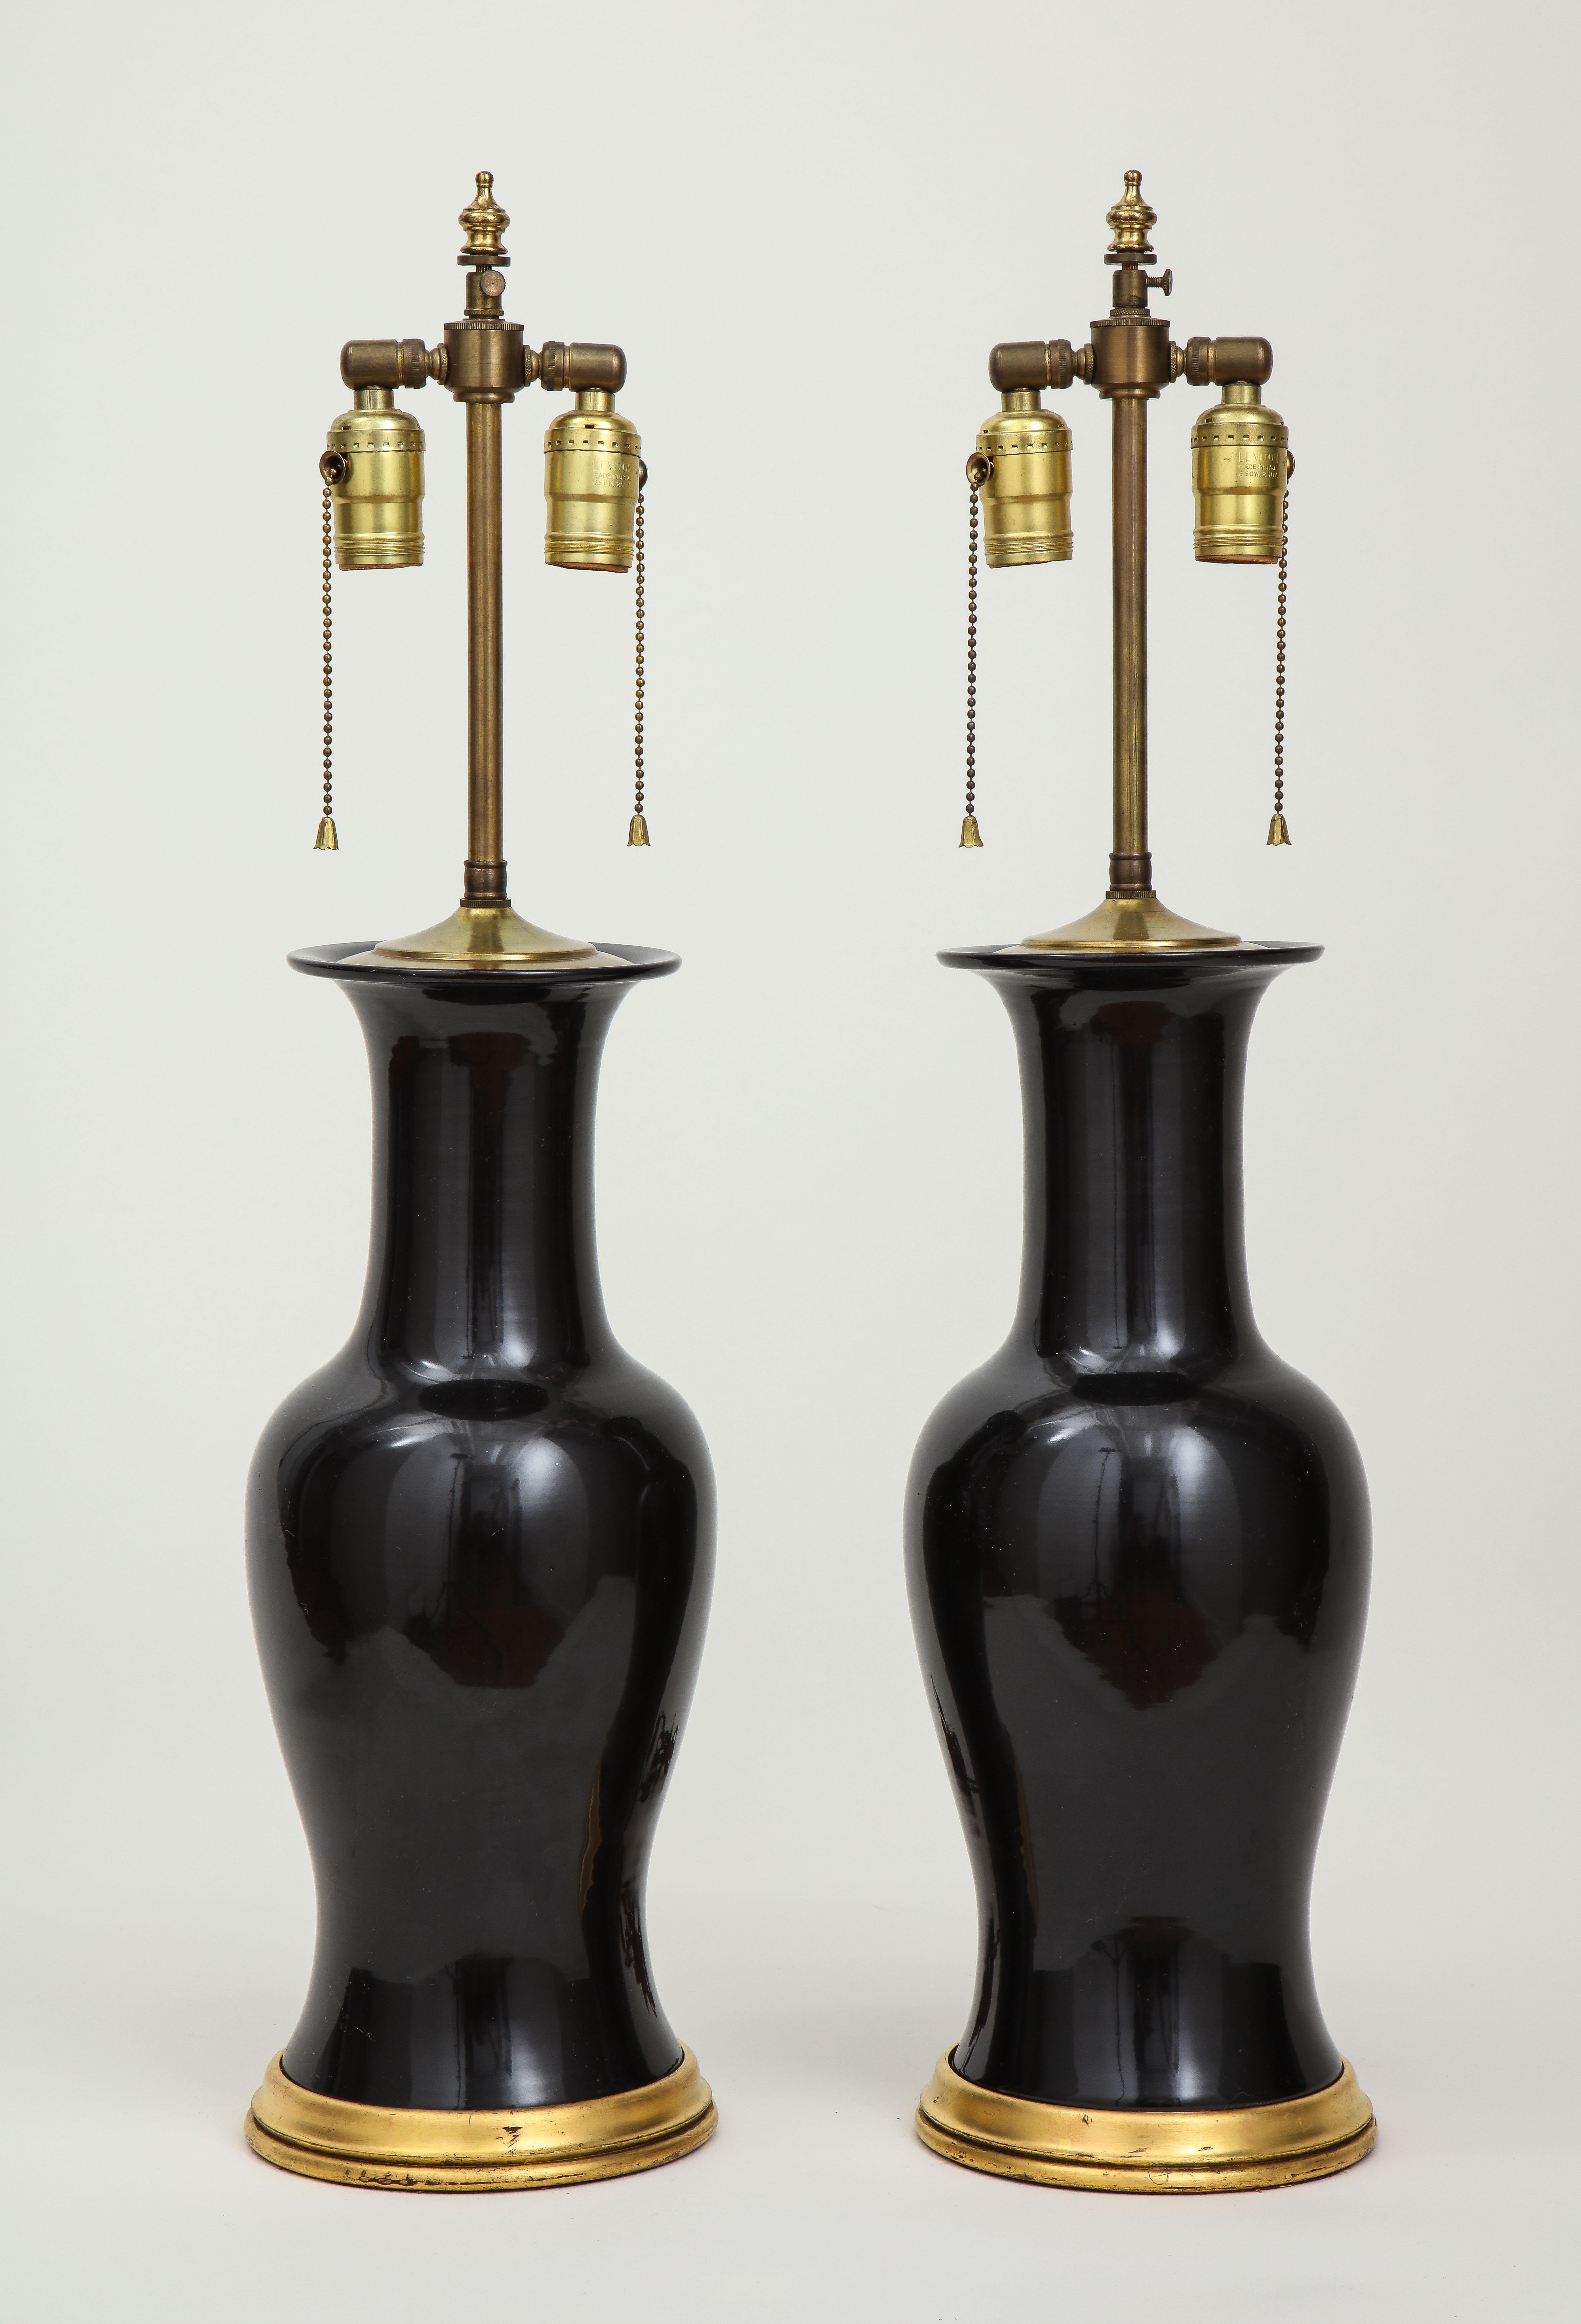 Each fitted with two brass light sockets and adjustable rod to change overall height, mounted on a gilt base.